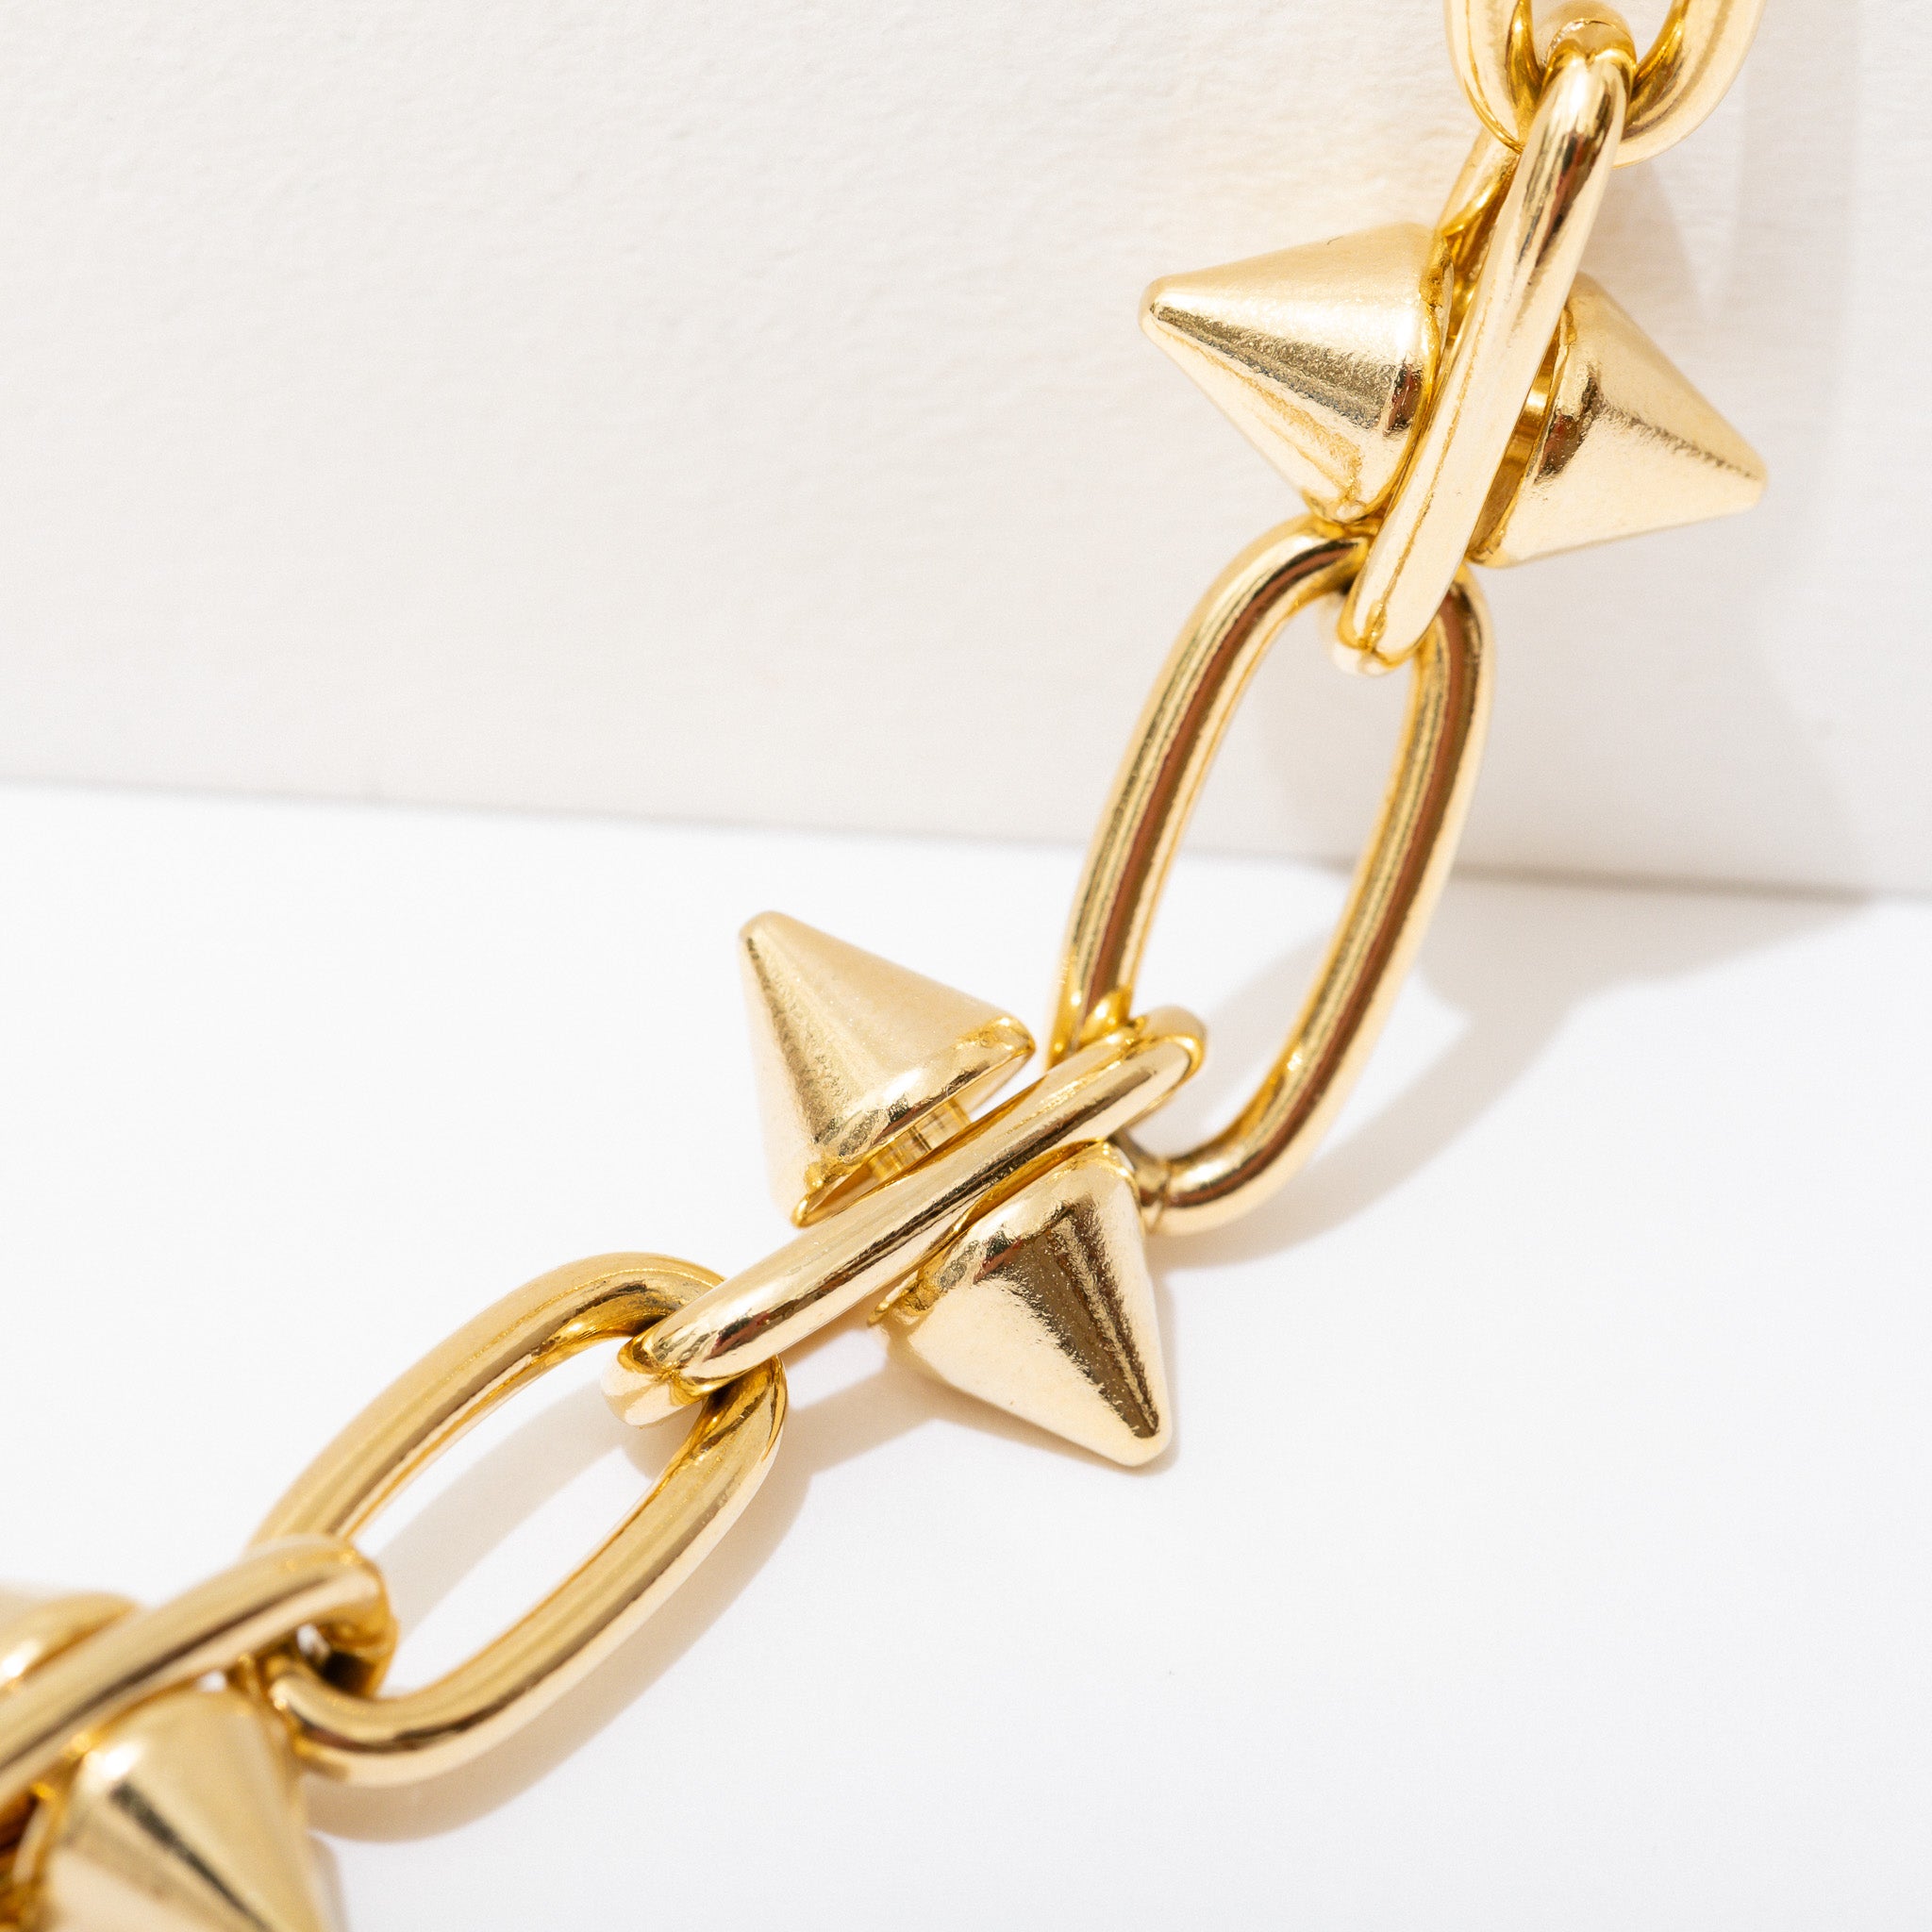 Toom Bracelet, 14k Gold Plated Spike Barbed Wire Chain